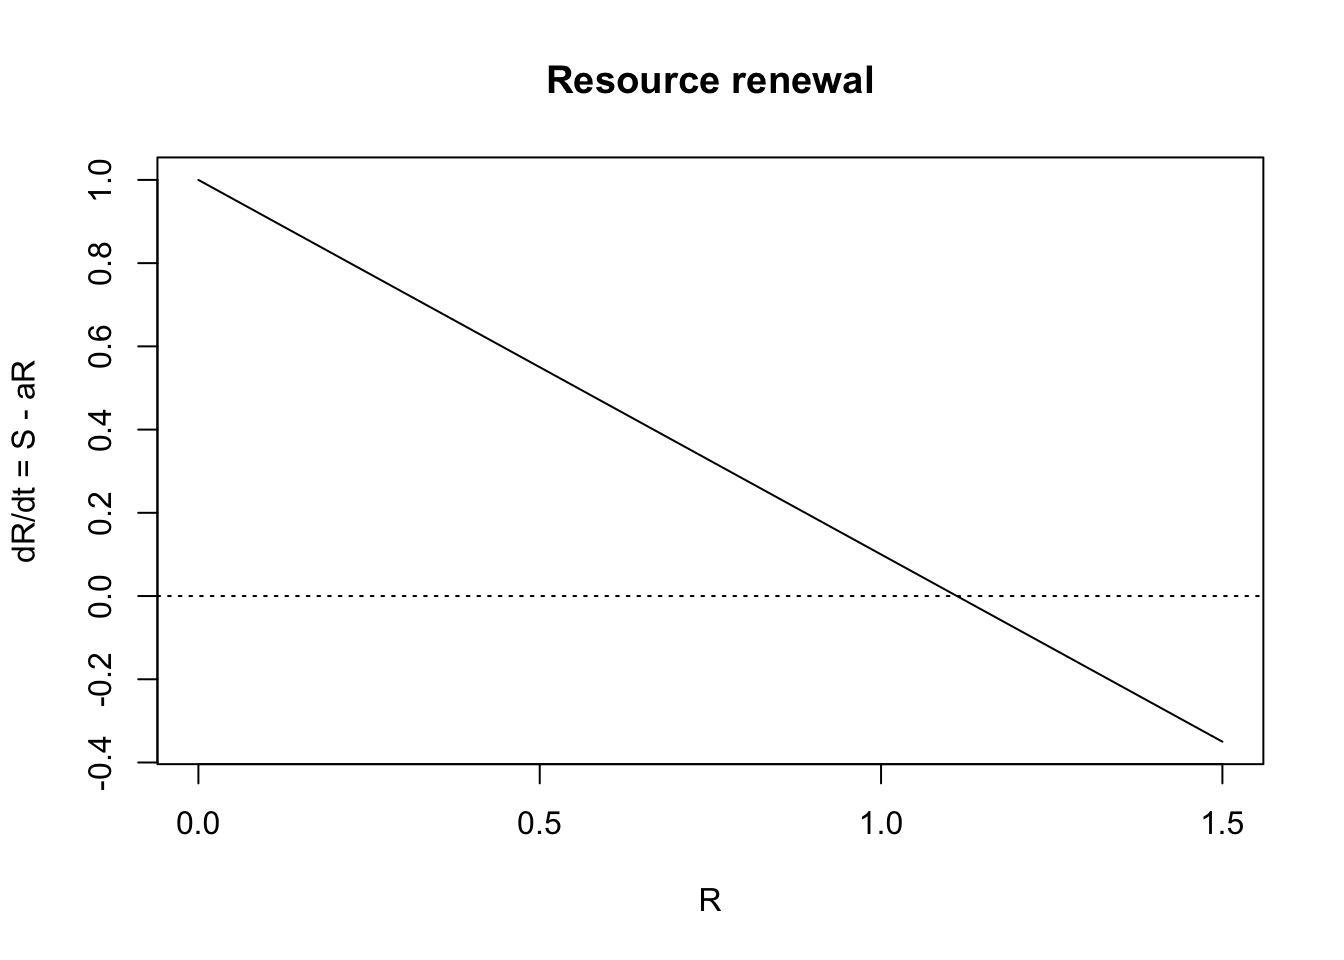 *Different types of resources can renew in different ways. An inorganic soil nutrient might renew the way we modeled it in R* competition, whereas a prey population might renew via exponential growth.*